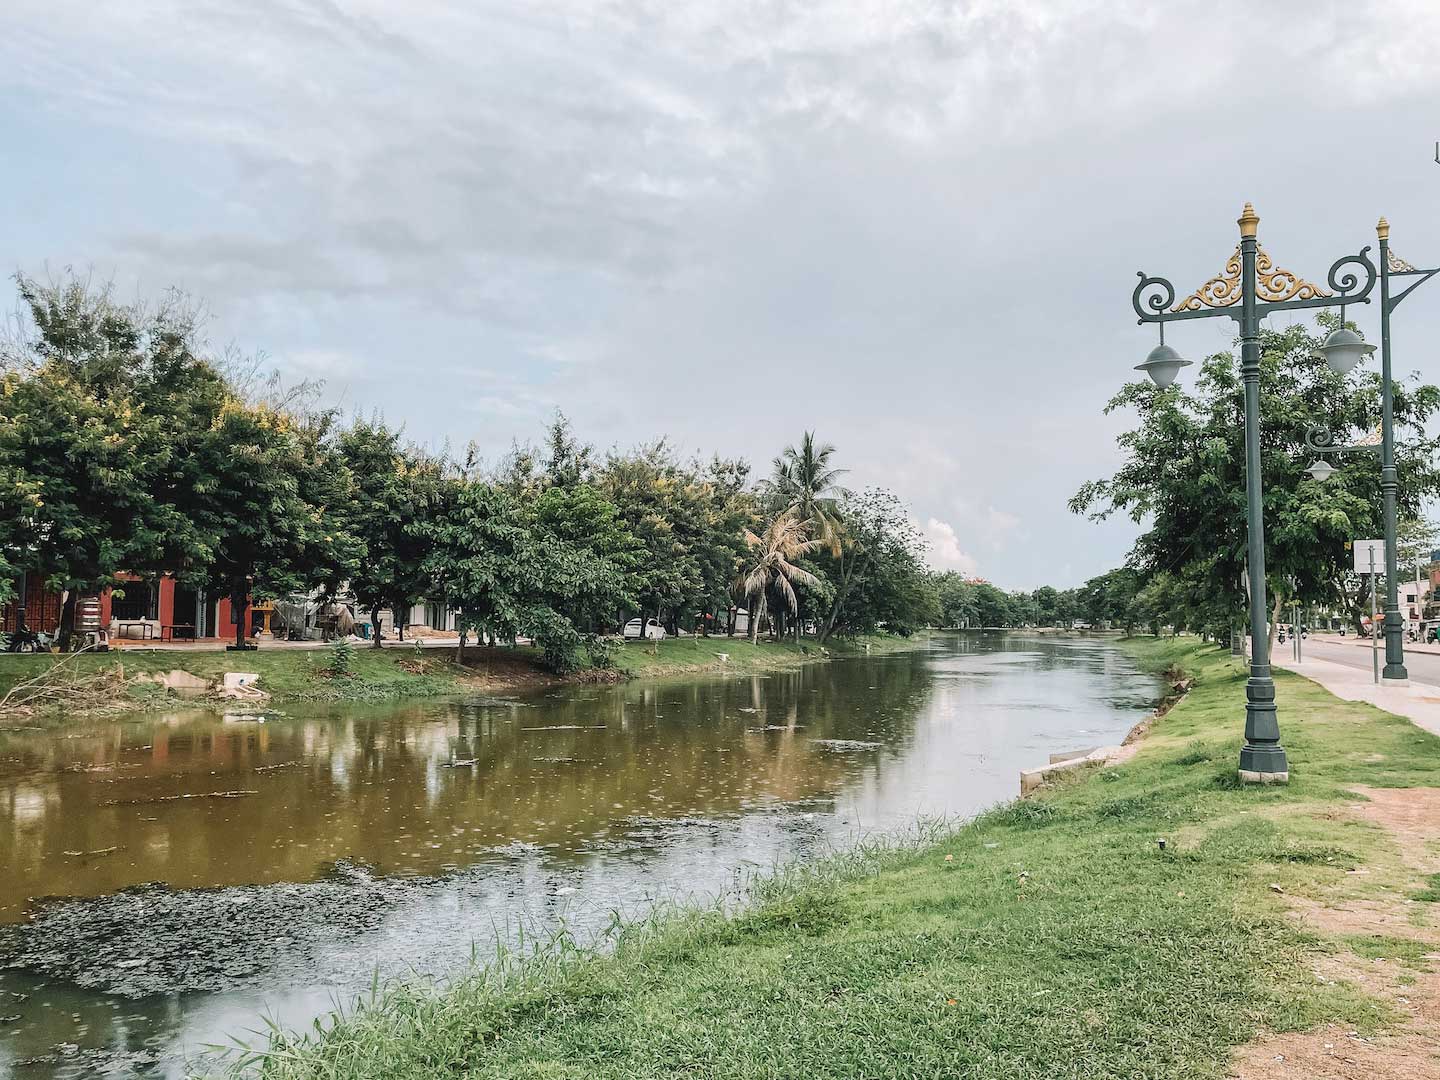 Walking along Siem Reap River on a cloudy day, one of the free things to do in Siem reap besides temples